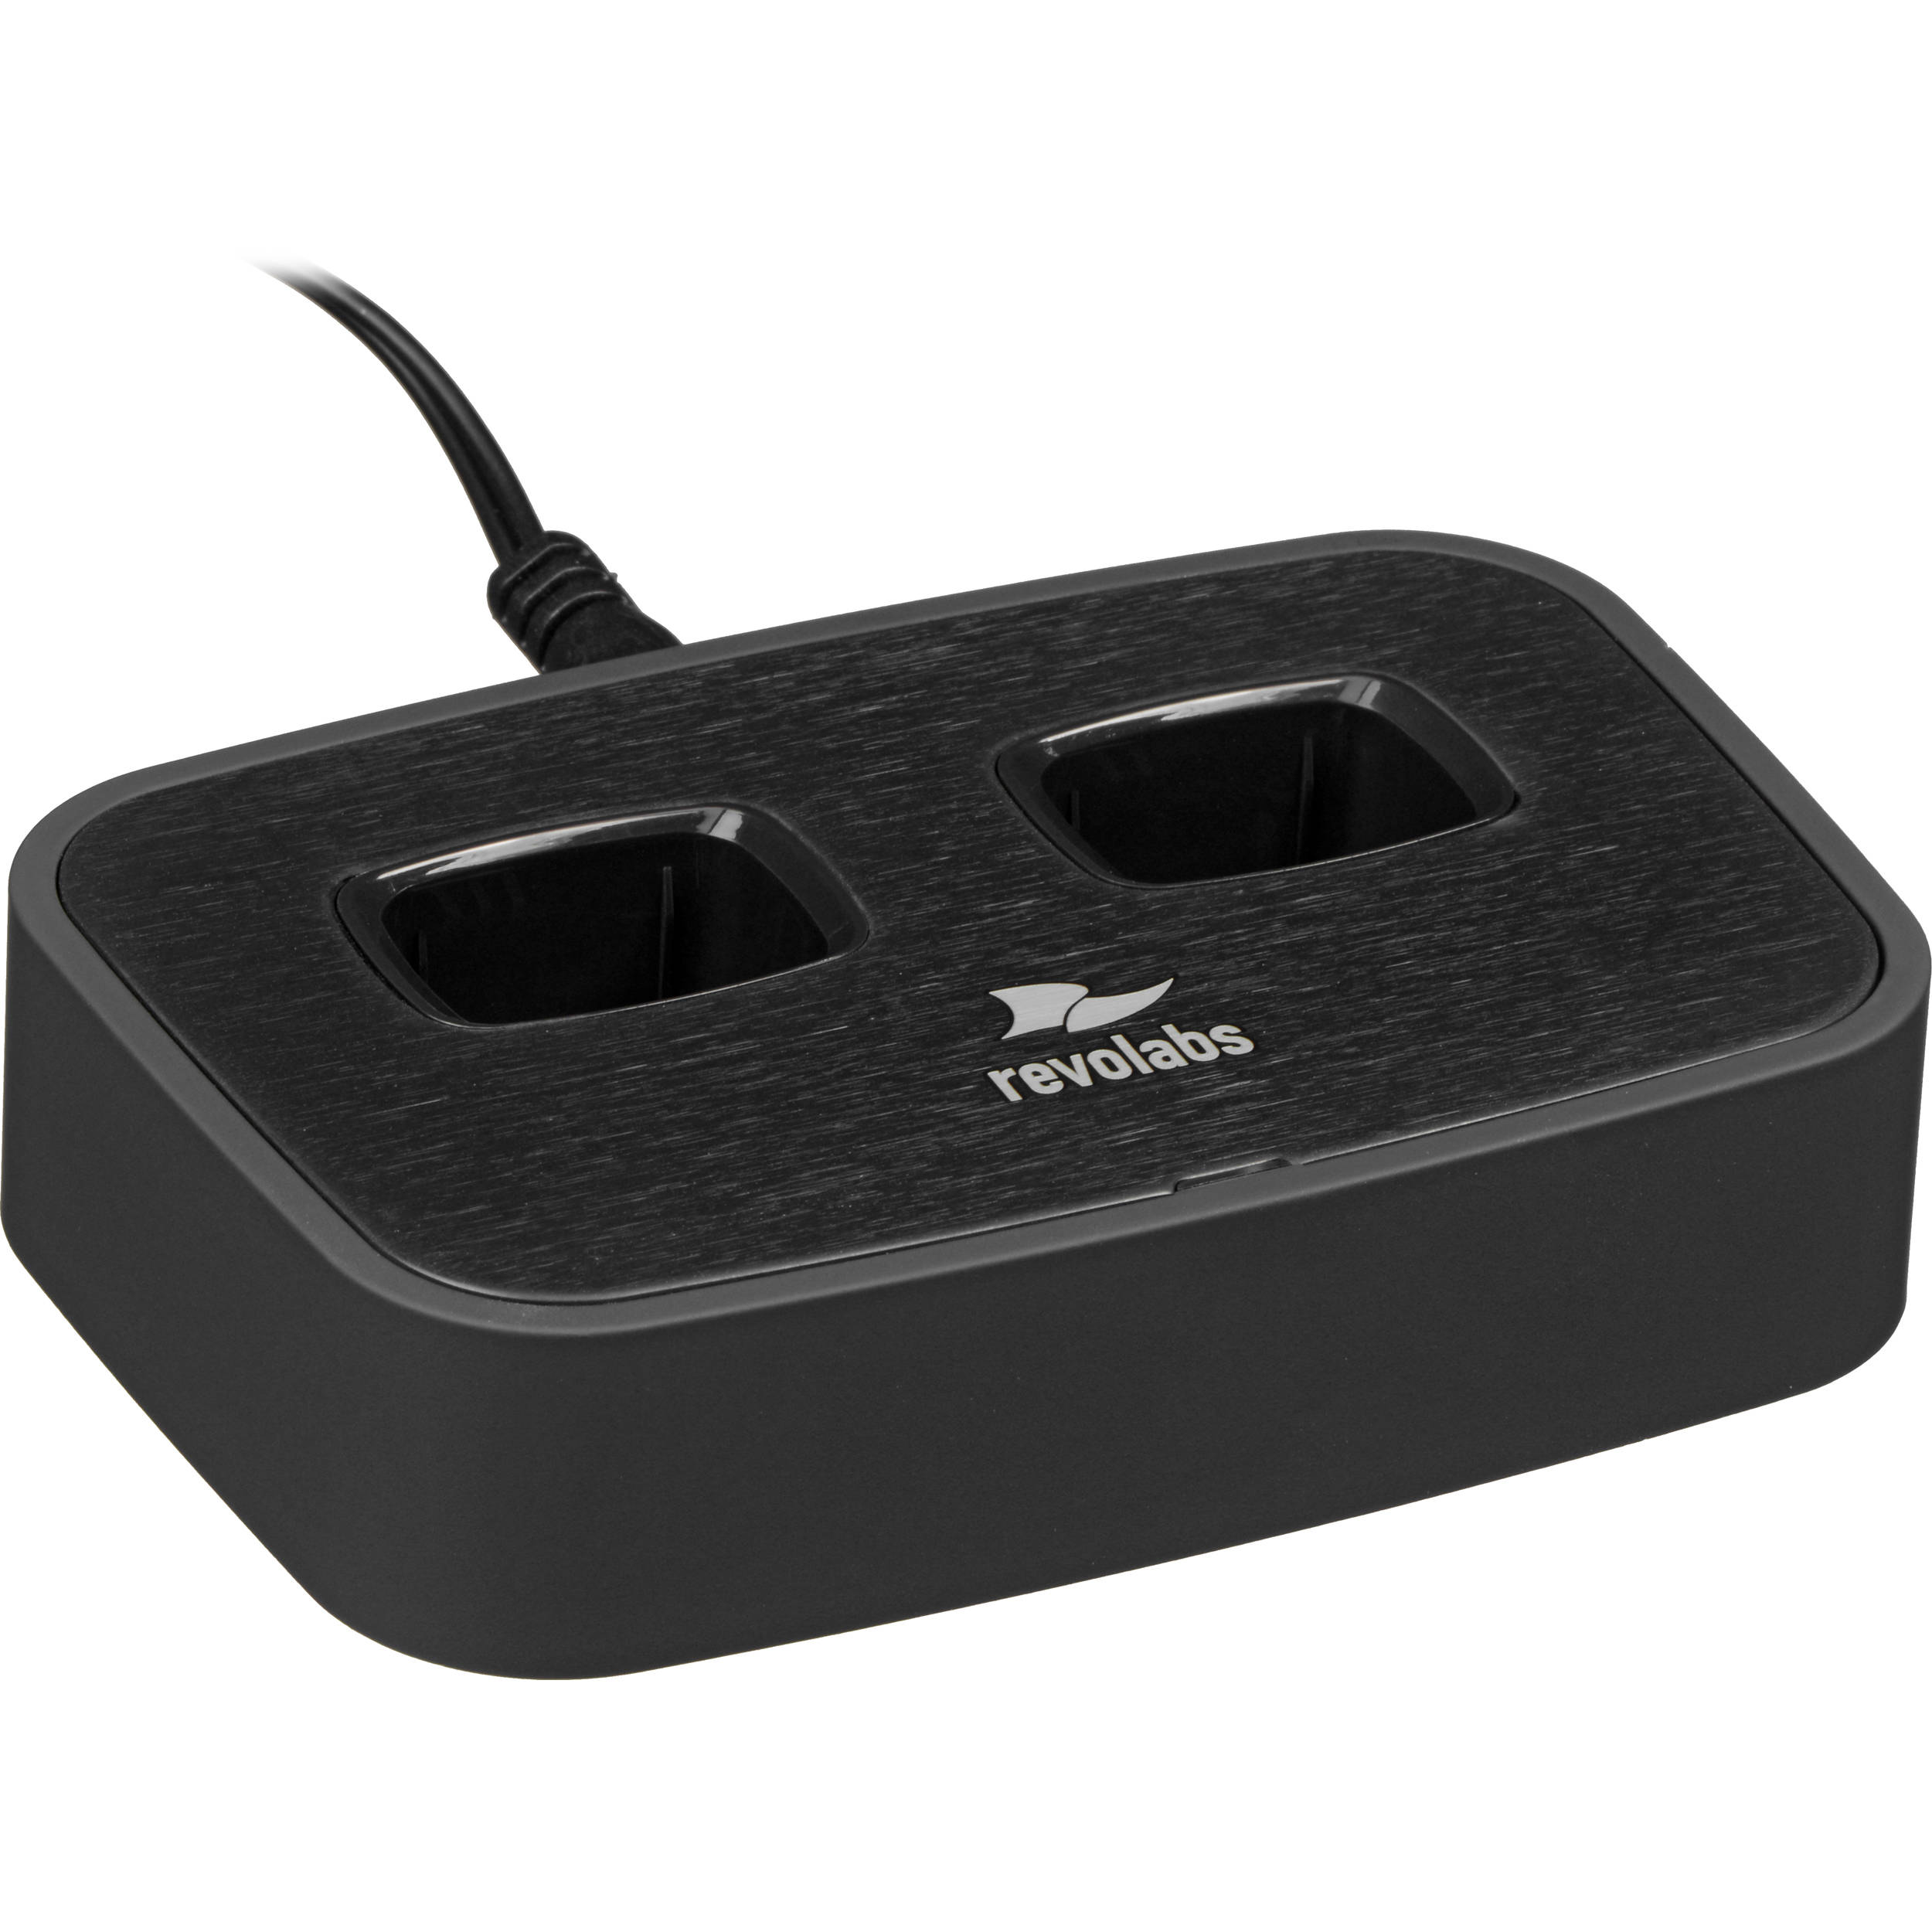 Revolabs Charger Base for HD Dual Channel or HD